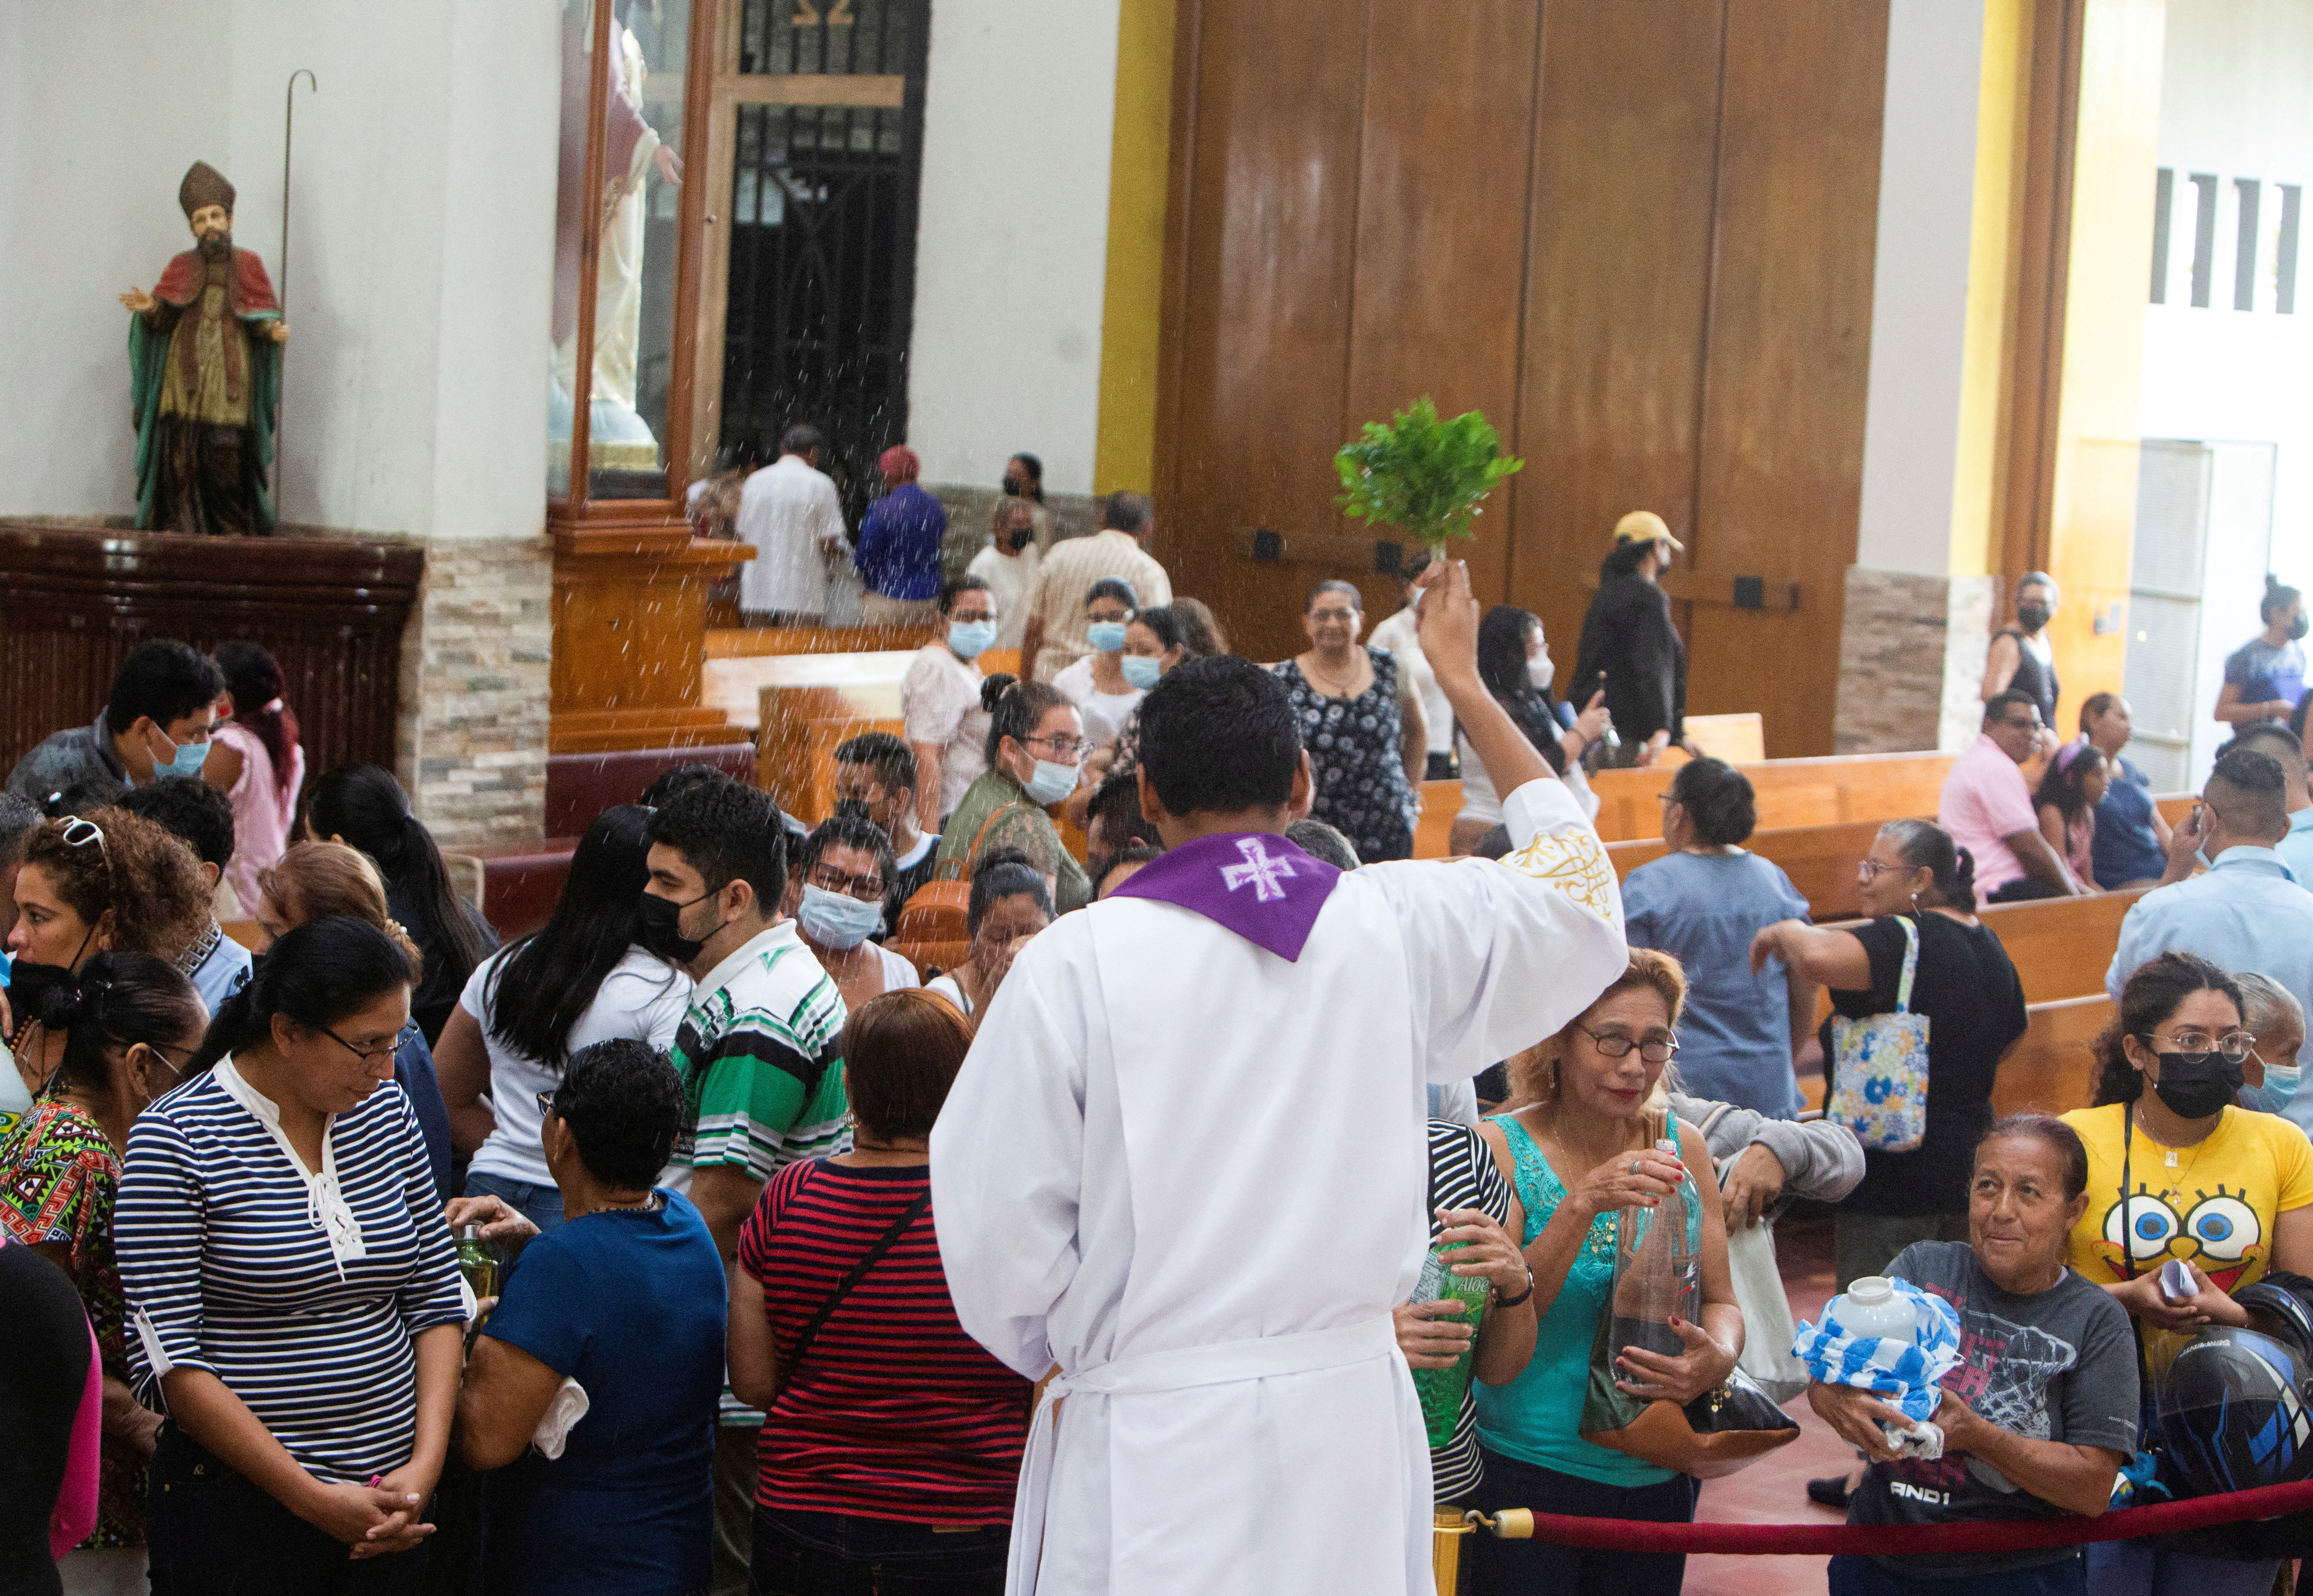 A bishop sprinkles water on the catholic parishioners at the Metropolitan Cathedral, in Managua